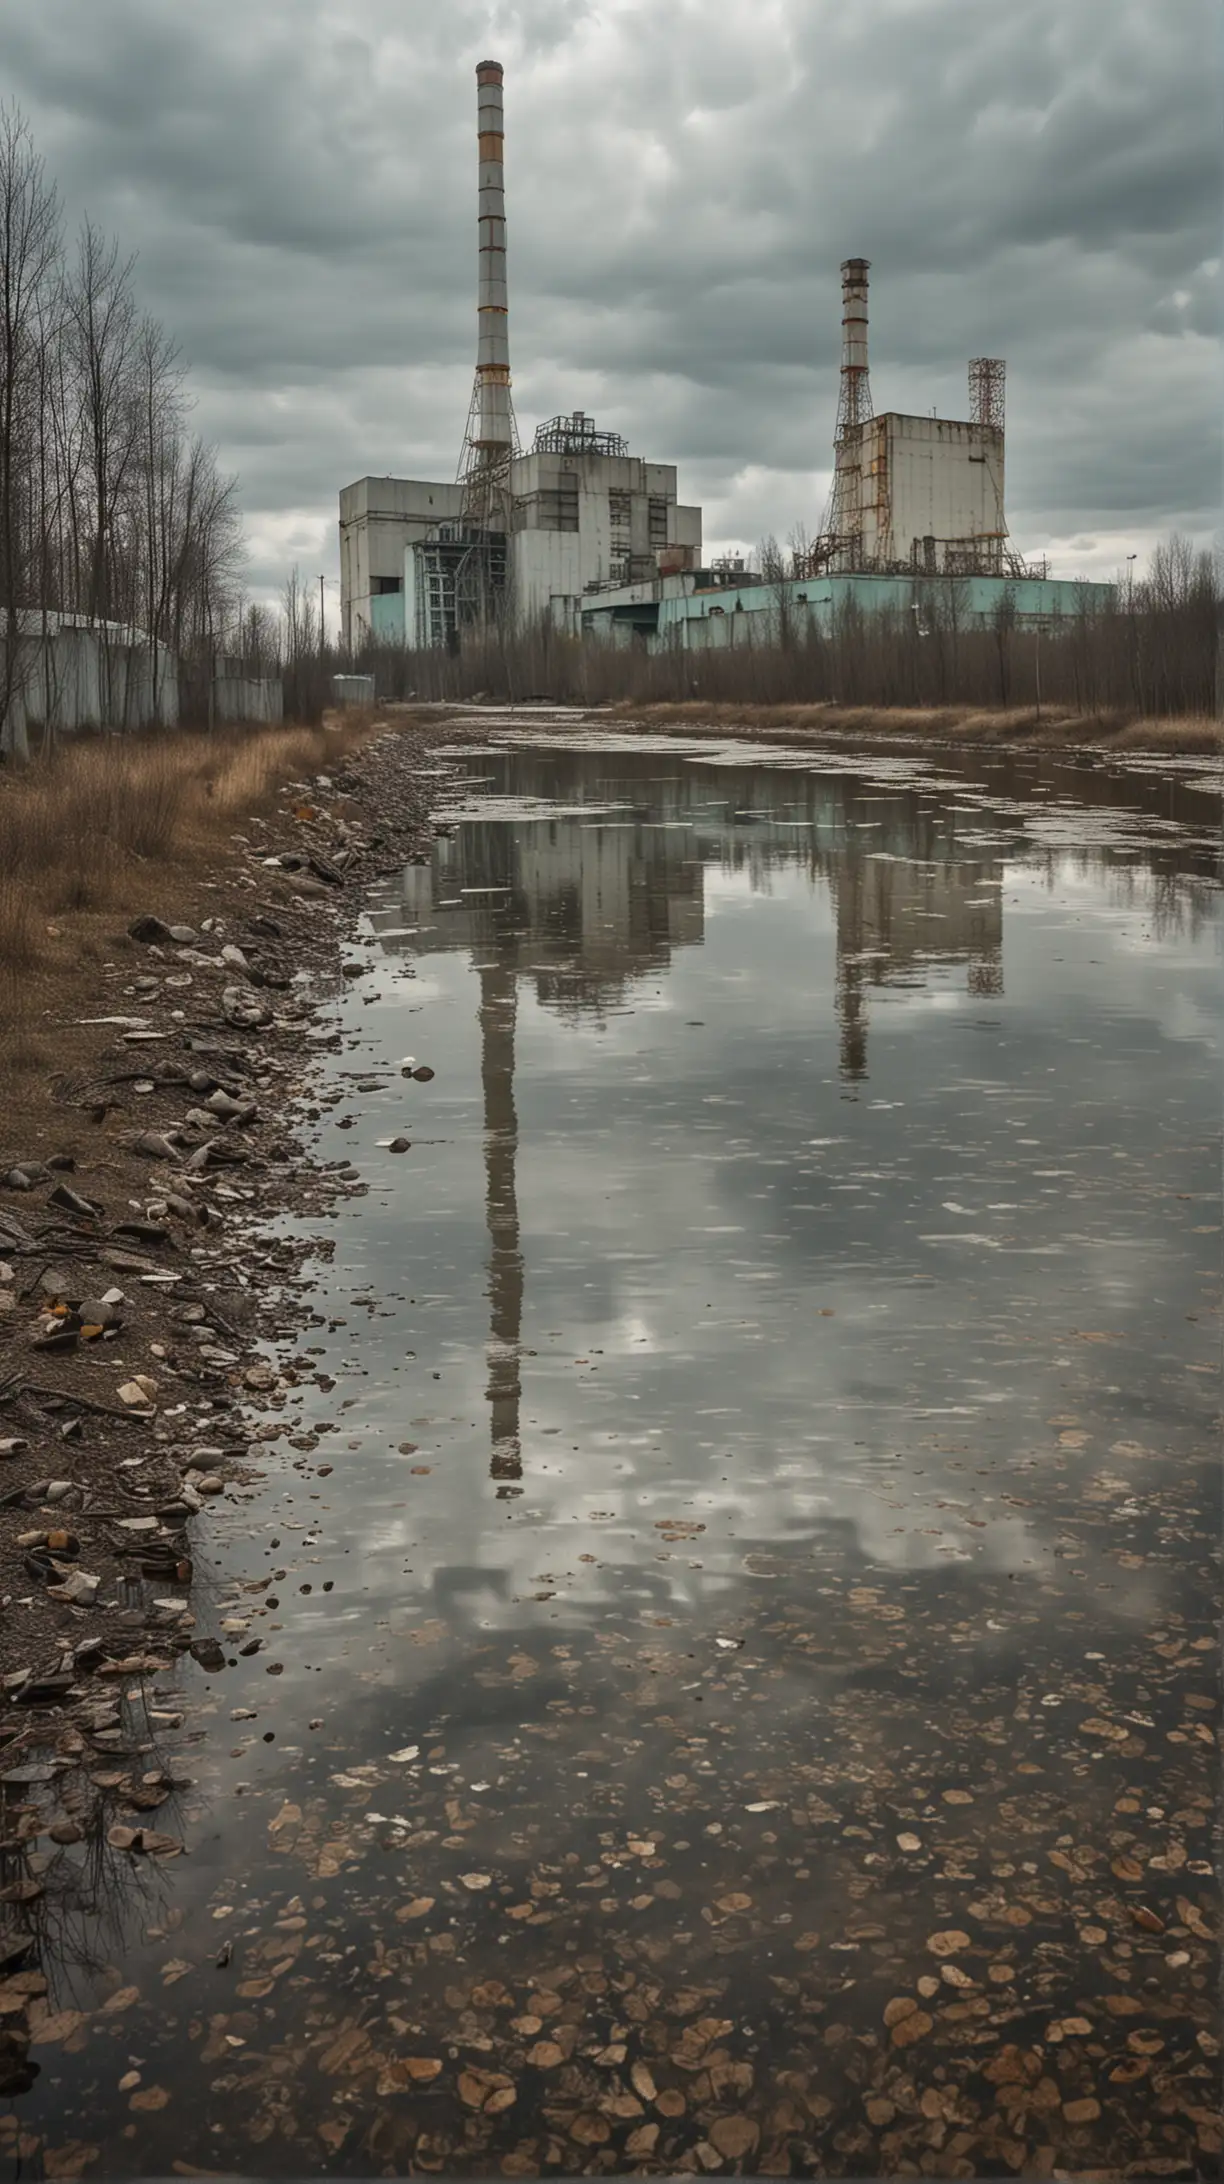 Chernobyl Nuclear Power Plant Before the Disaster